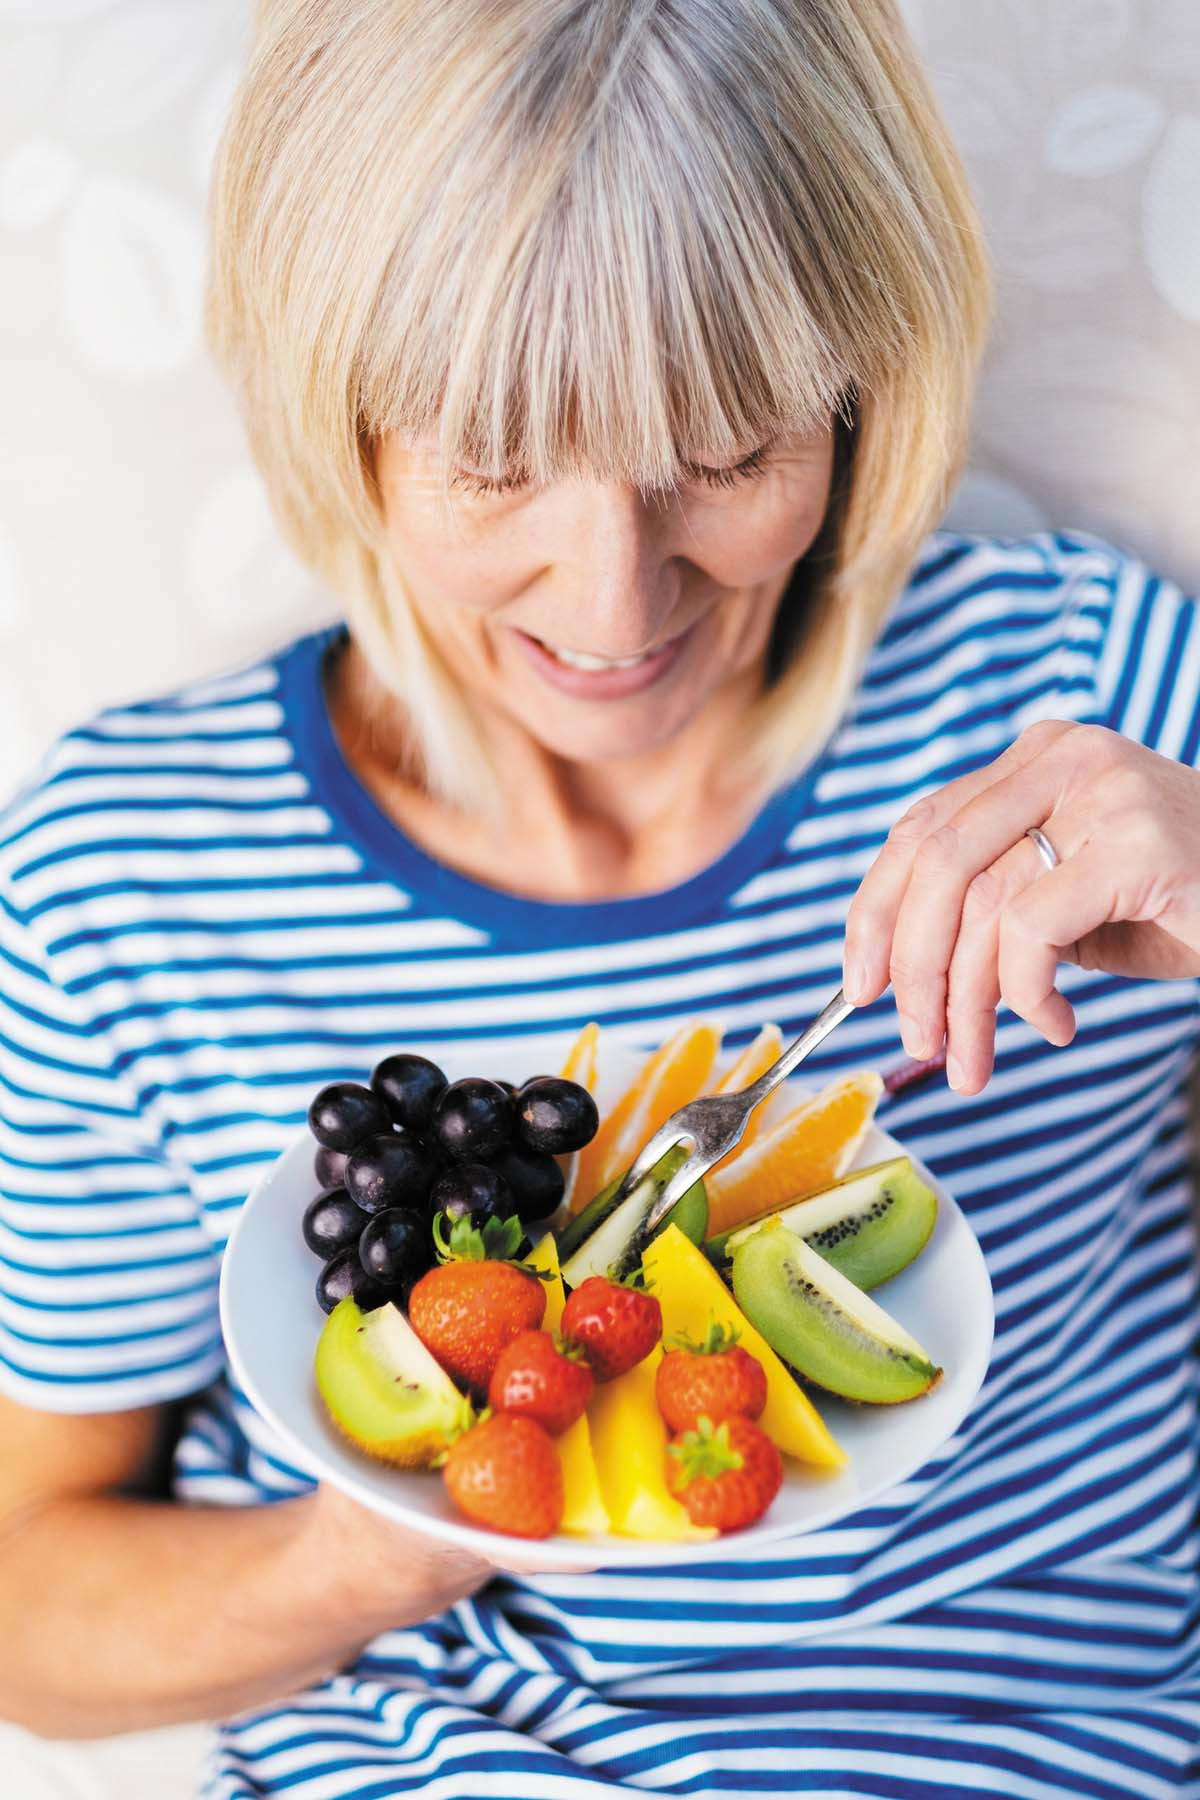 photo of a woman holding a plate containing an assortment of fruit, and a fork in her other hand